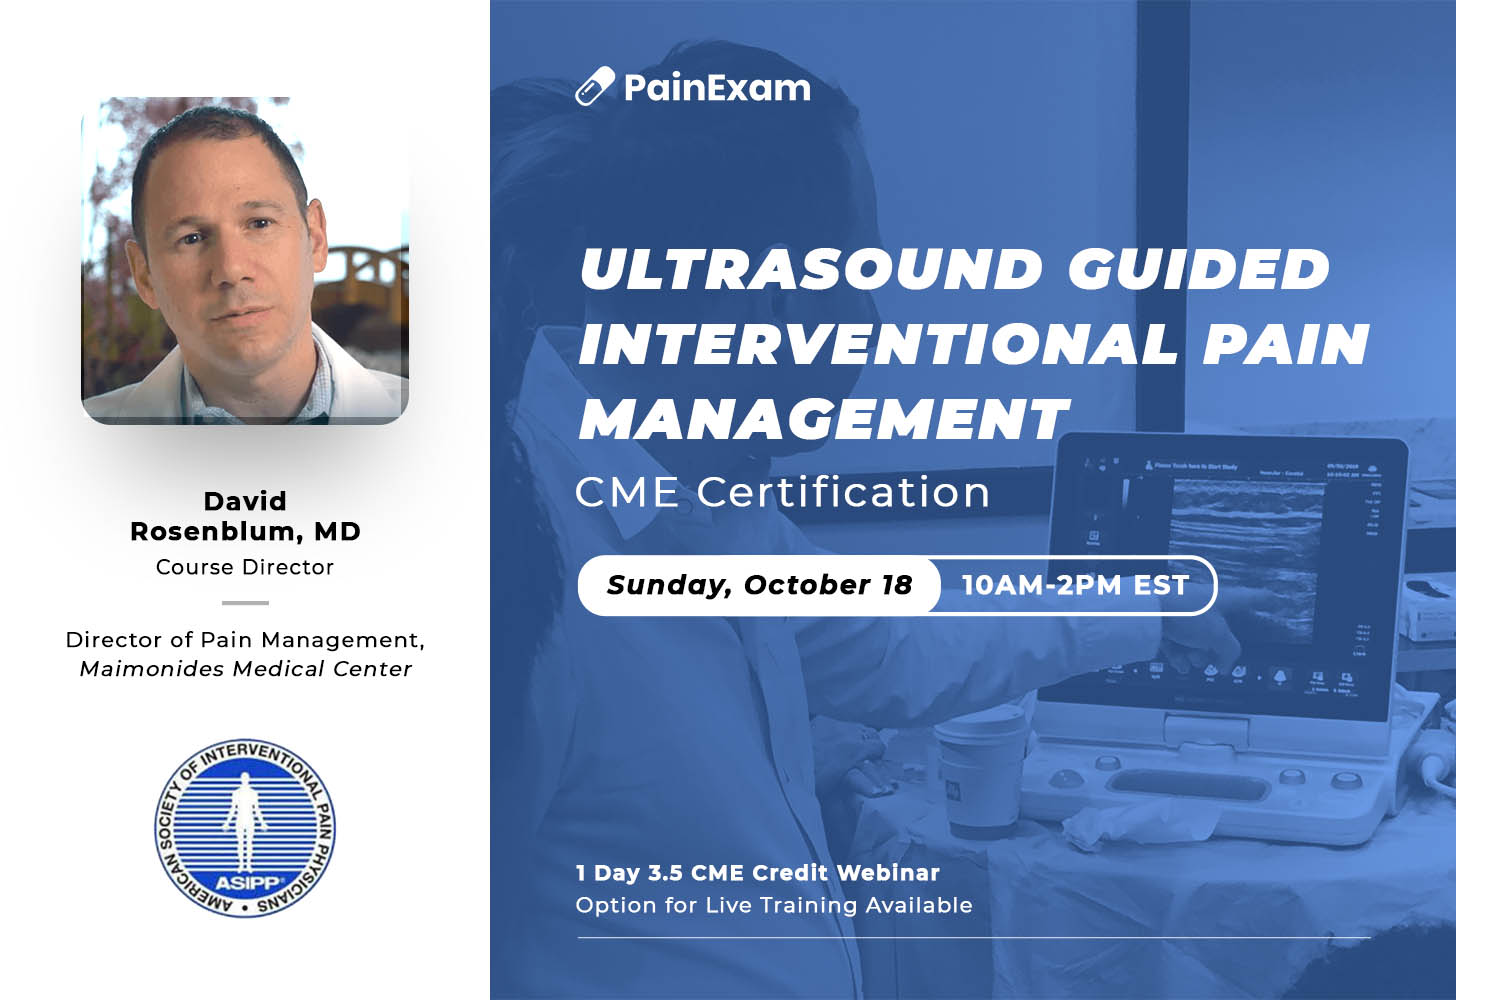 Launches New Ultrasound Interventional Pain Management CME